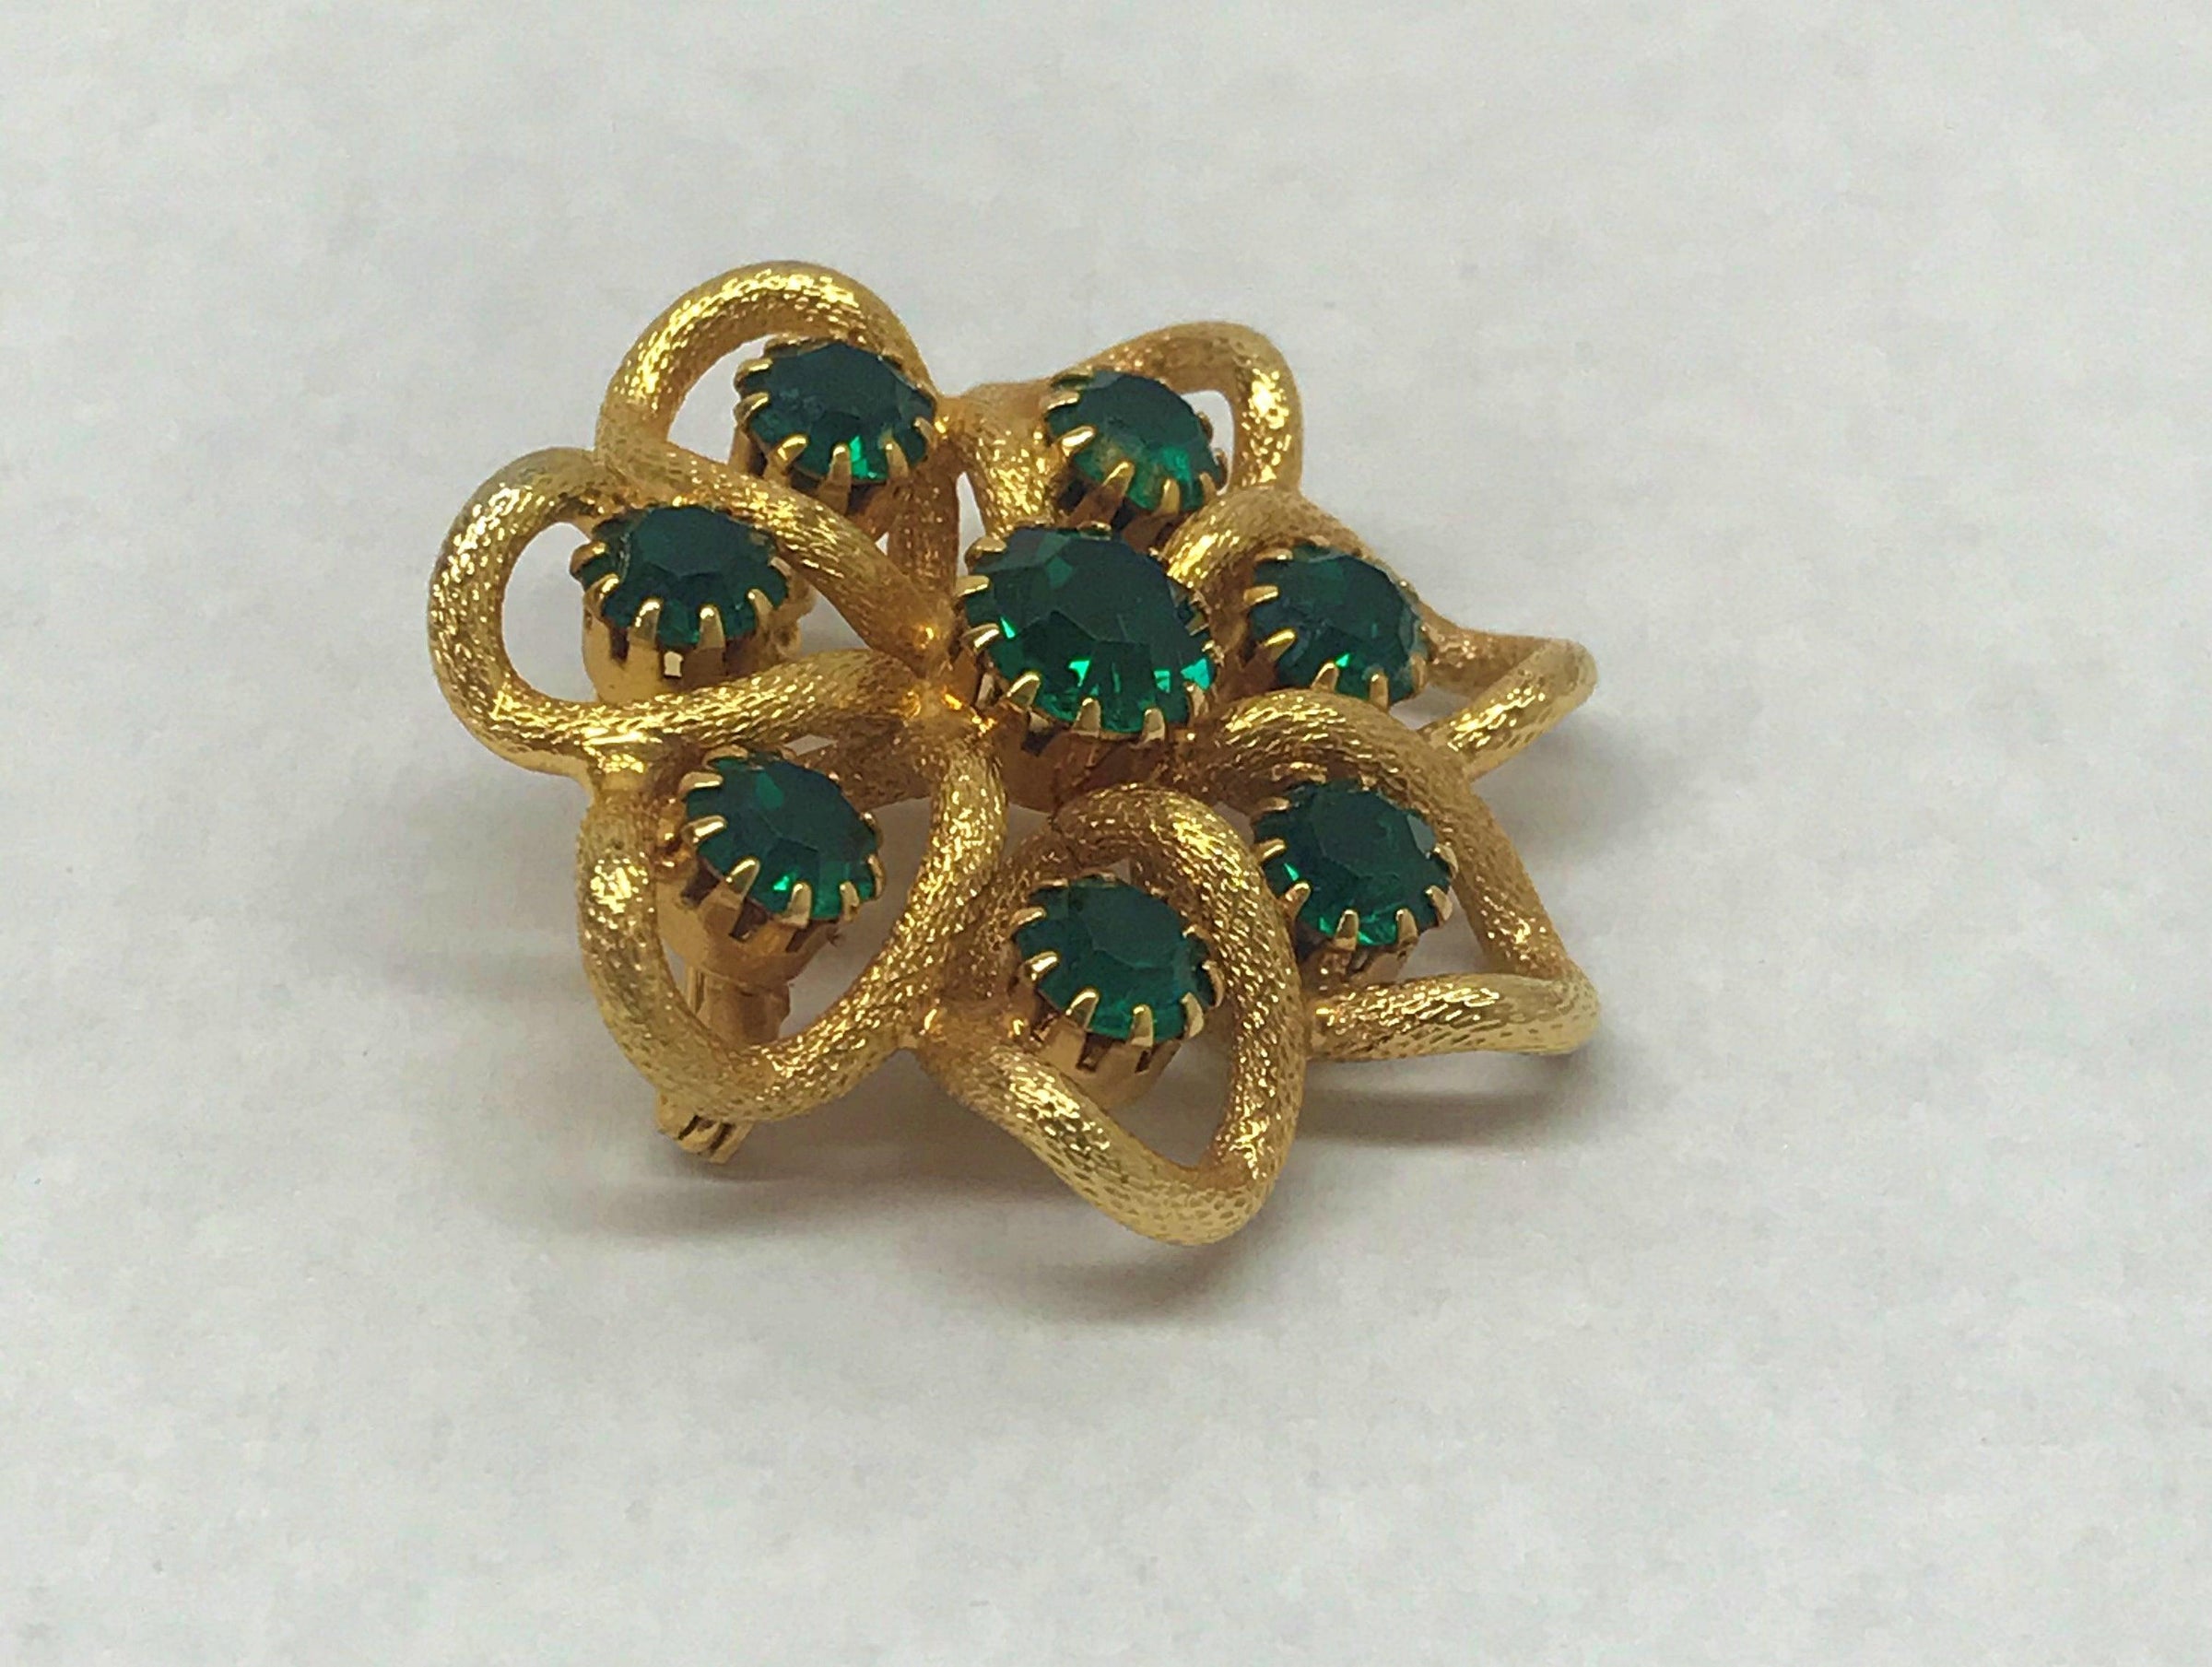 Vintage Gold Tone Brooch With Round Green Rhinestones - Hers and His Treasures